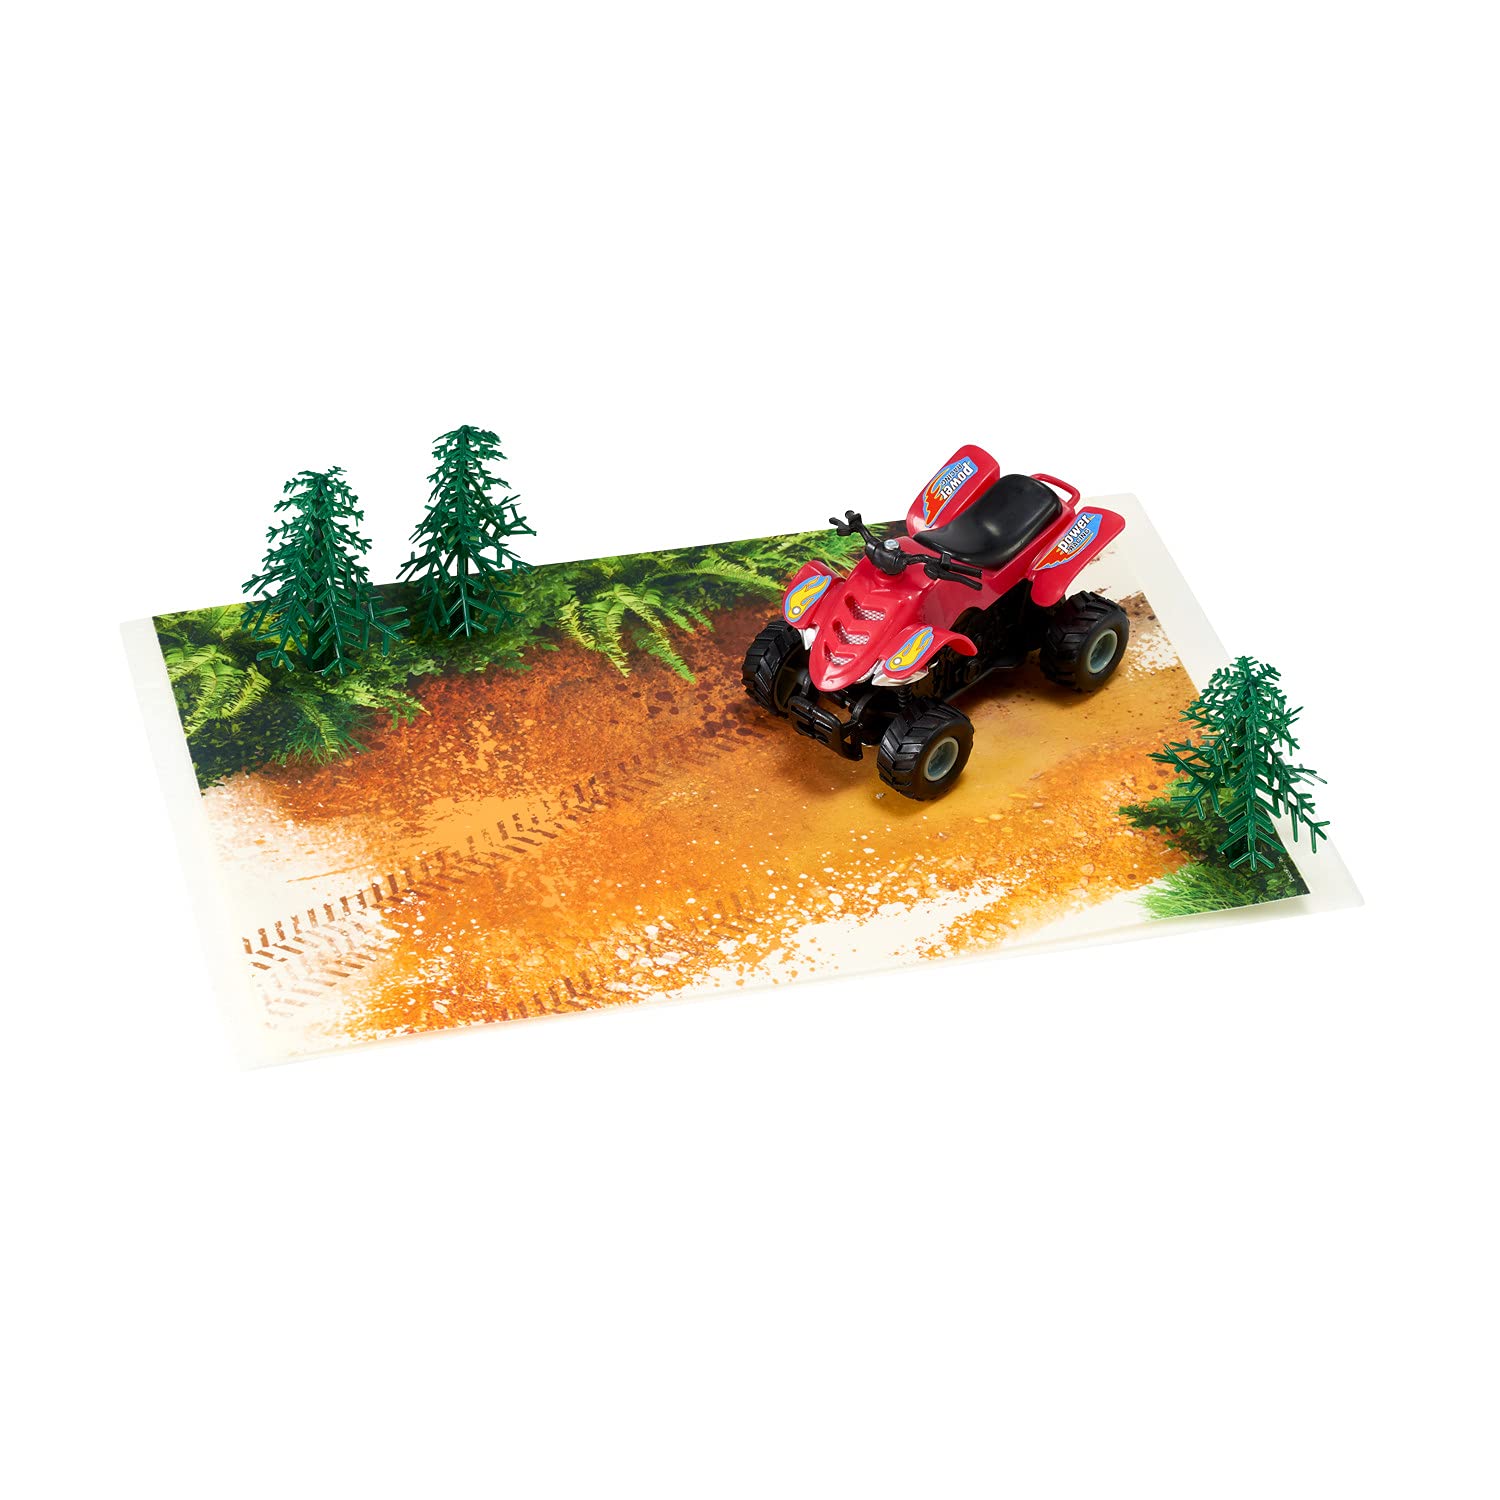 DecoPac ATV Cake Decoration, 4 Piece Cake Topper, Free Rolling All Terrain Vehicle And Trees Cake Decoration For Birthday, Events, Celebrations, Food Safe, Ready to Use ATV DecoSet Red